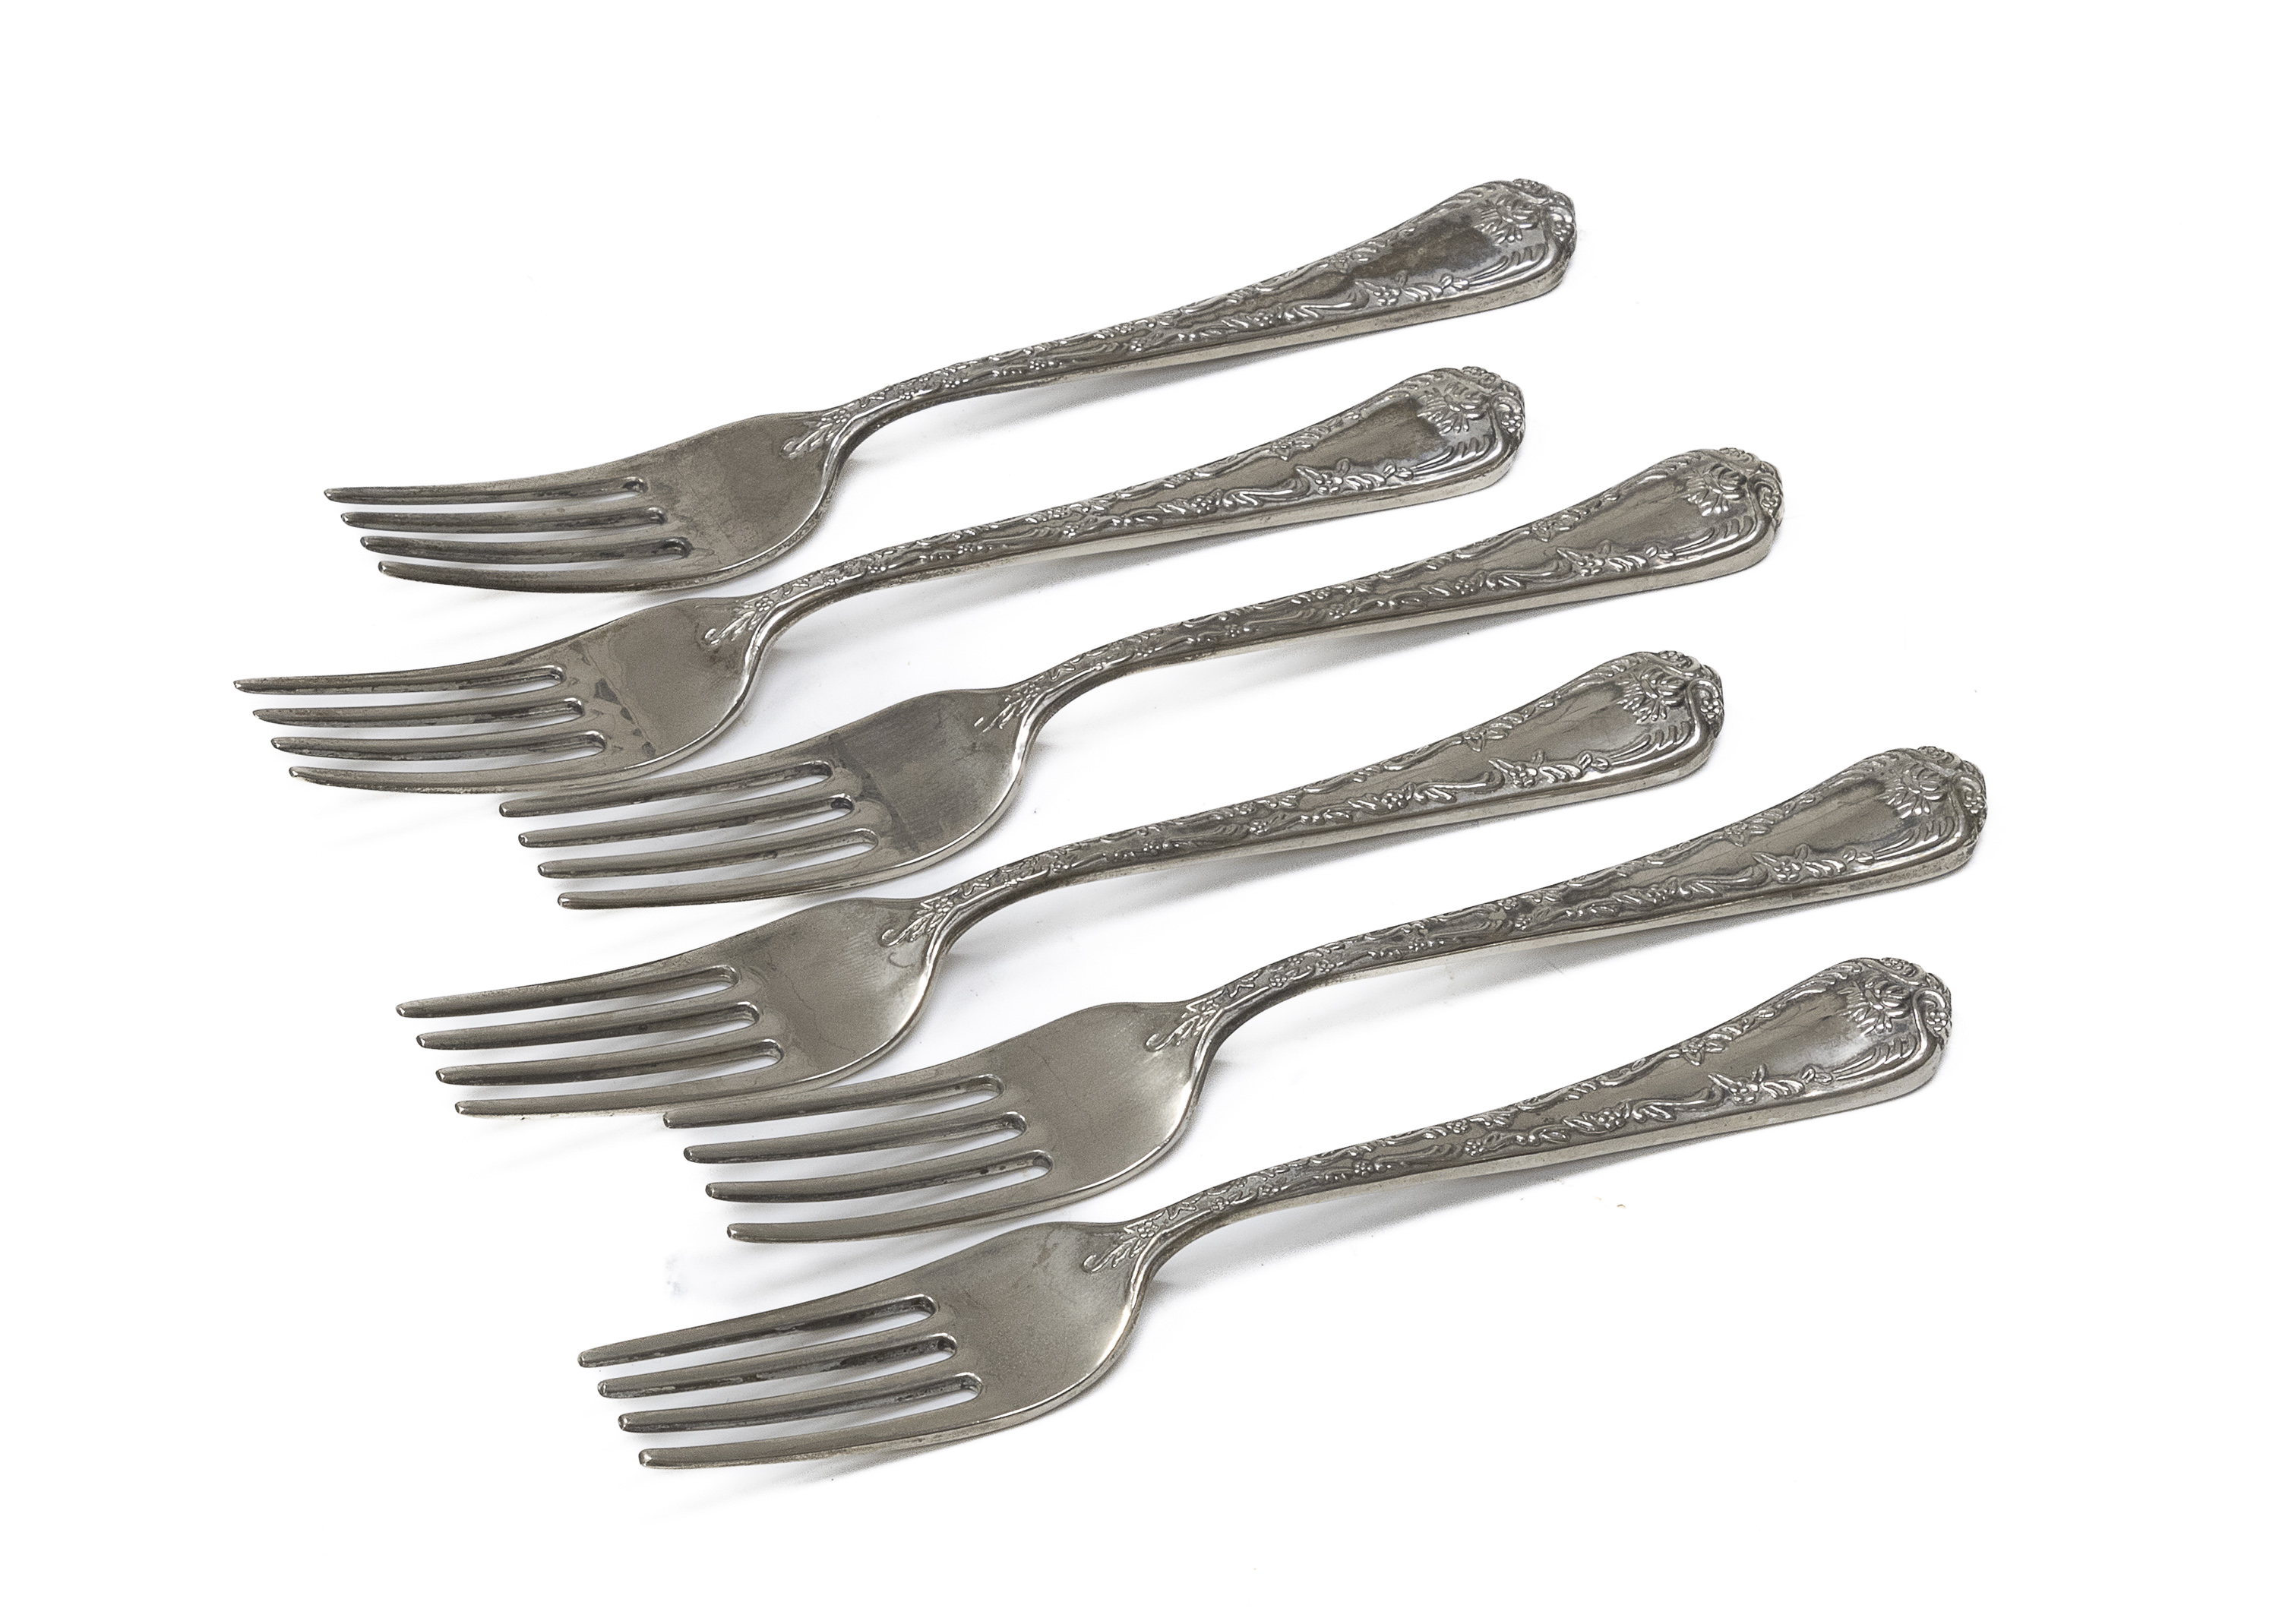 SIX SILVER-PLATED FORKS EARLY 20TH CENTURY